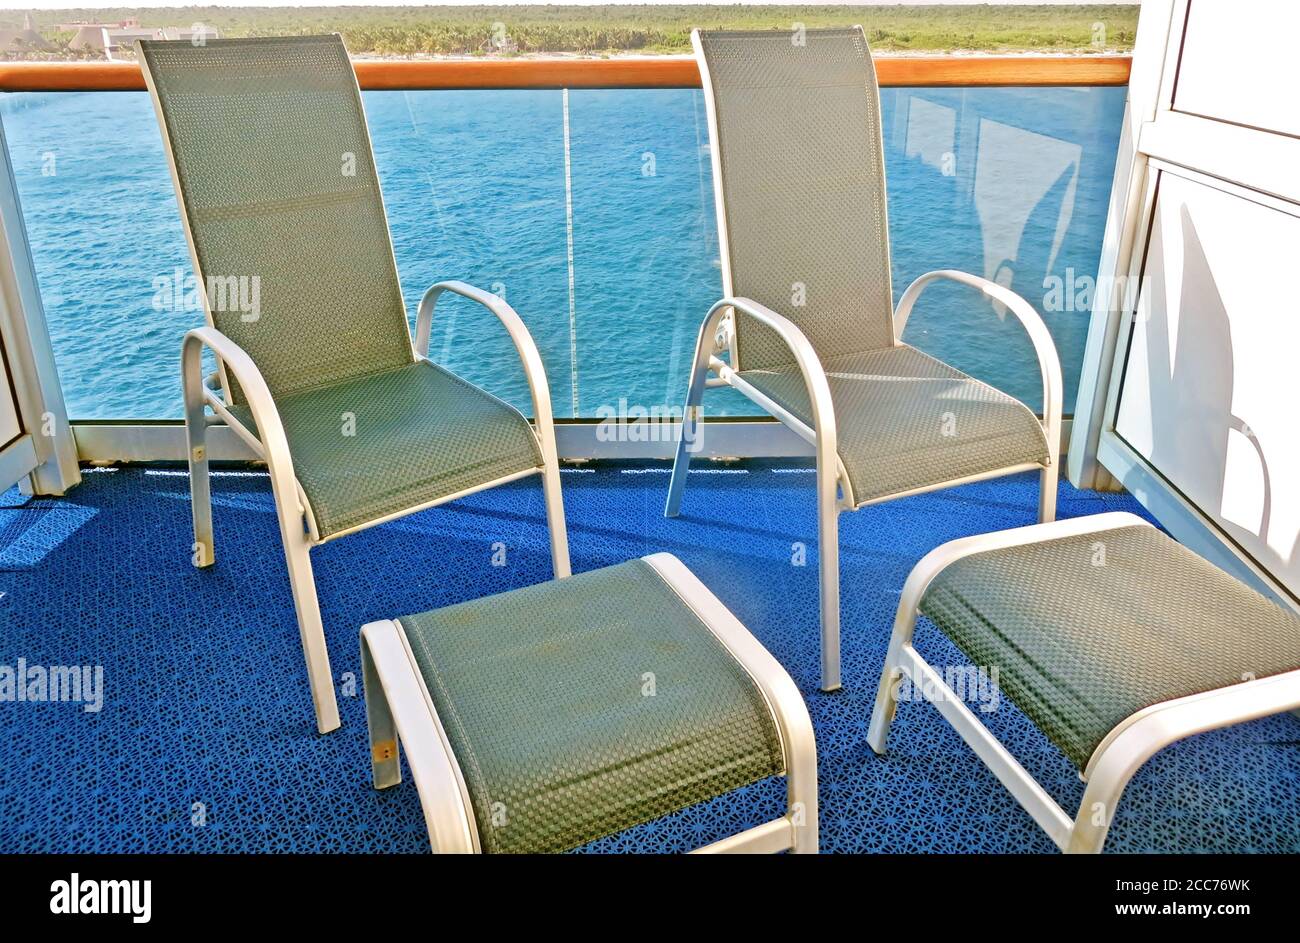 Empty lounge chairs on a cruise ship stateroom balcony Stock Photo